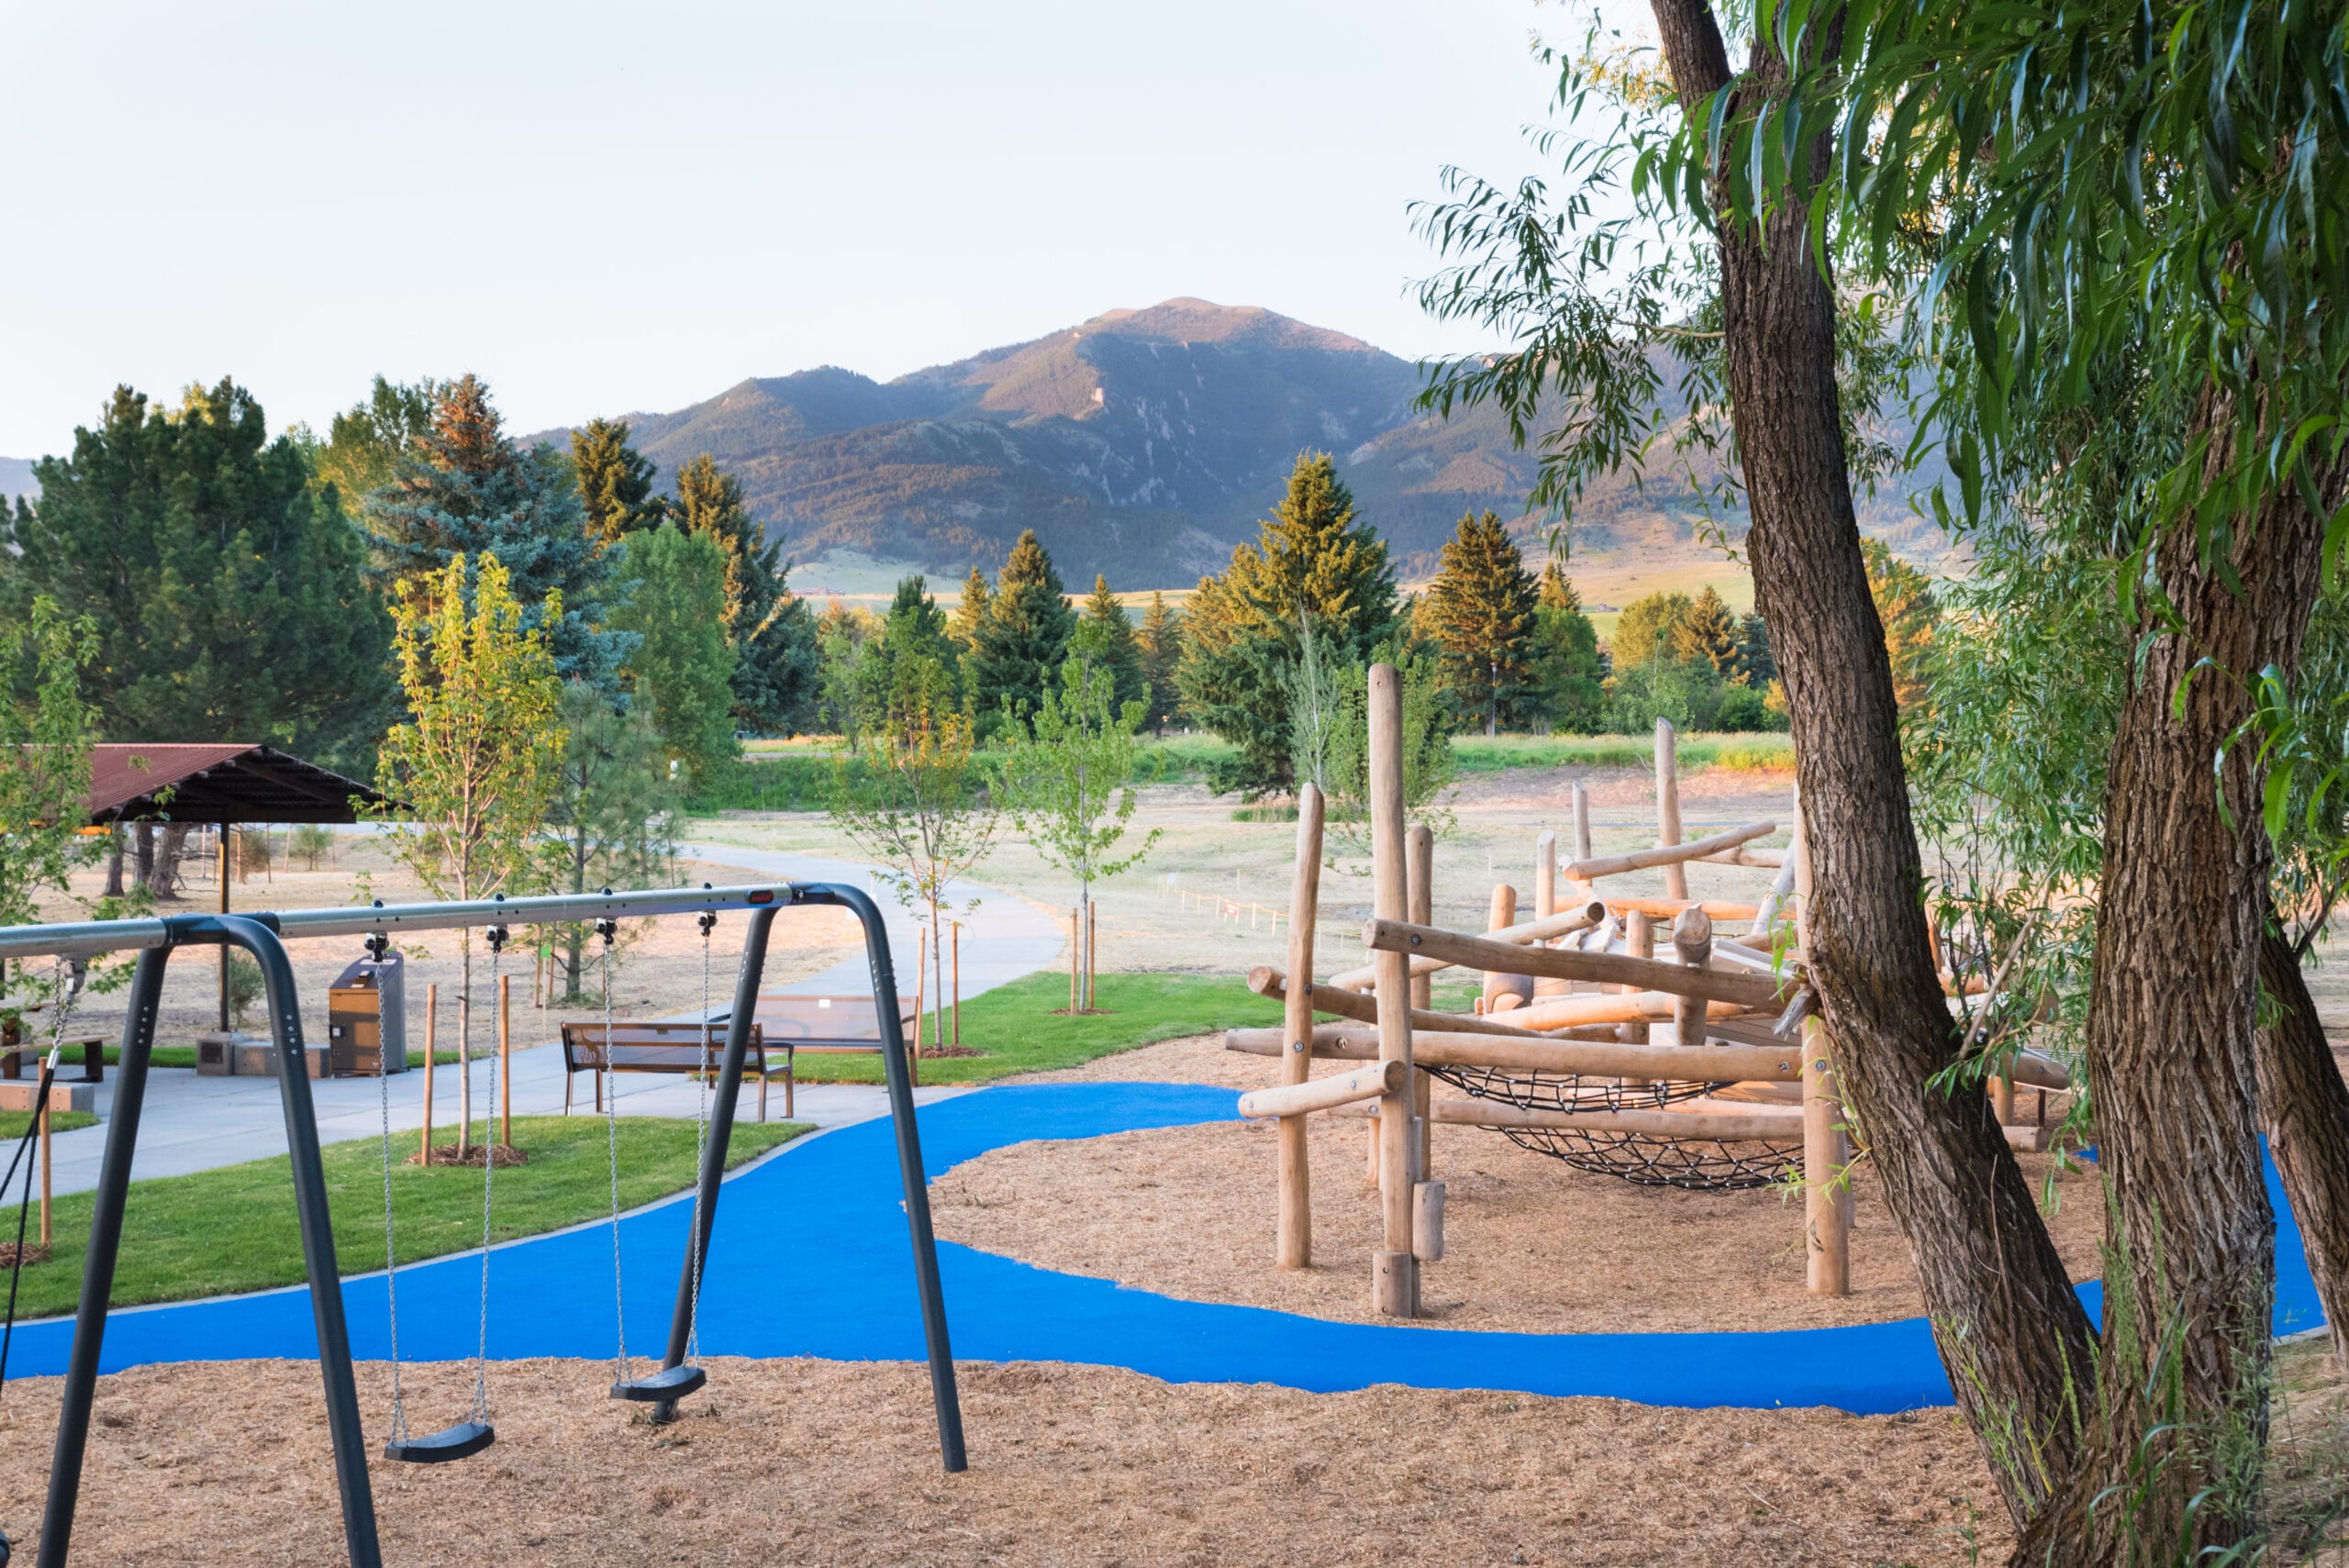 A playground with a swing set and a sand pit.